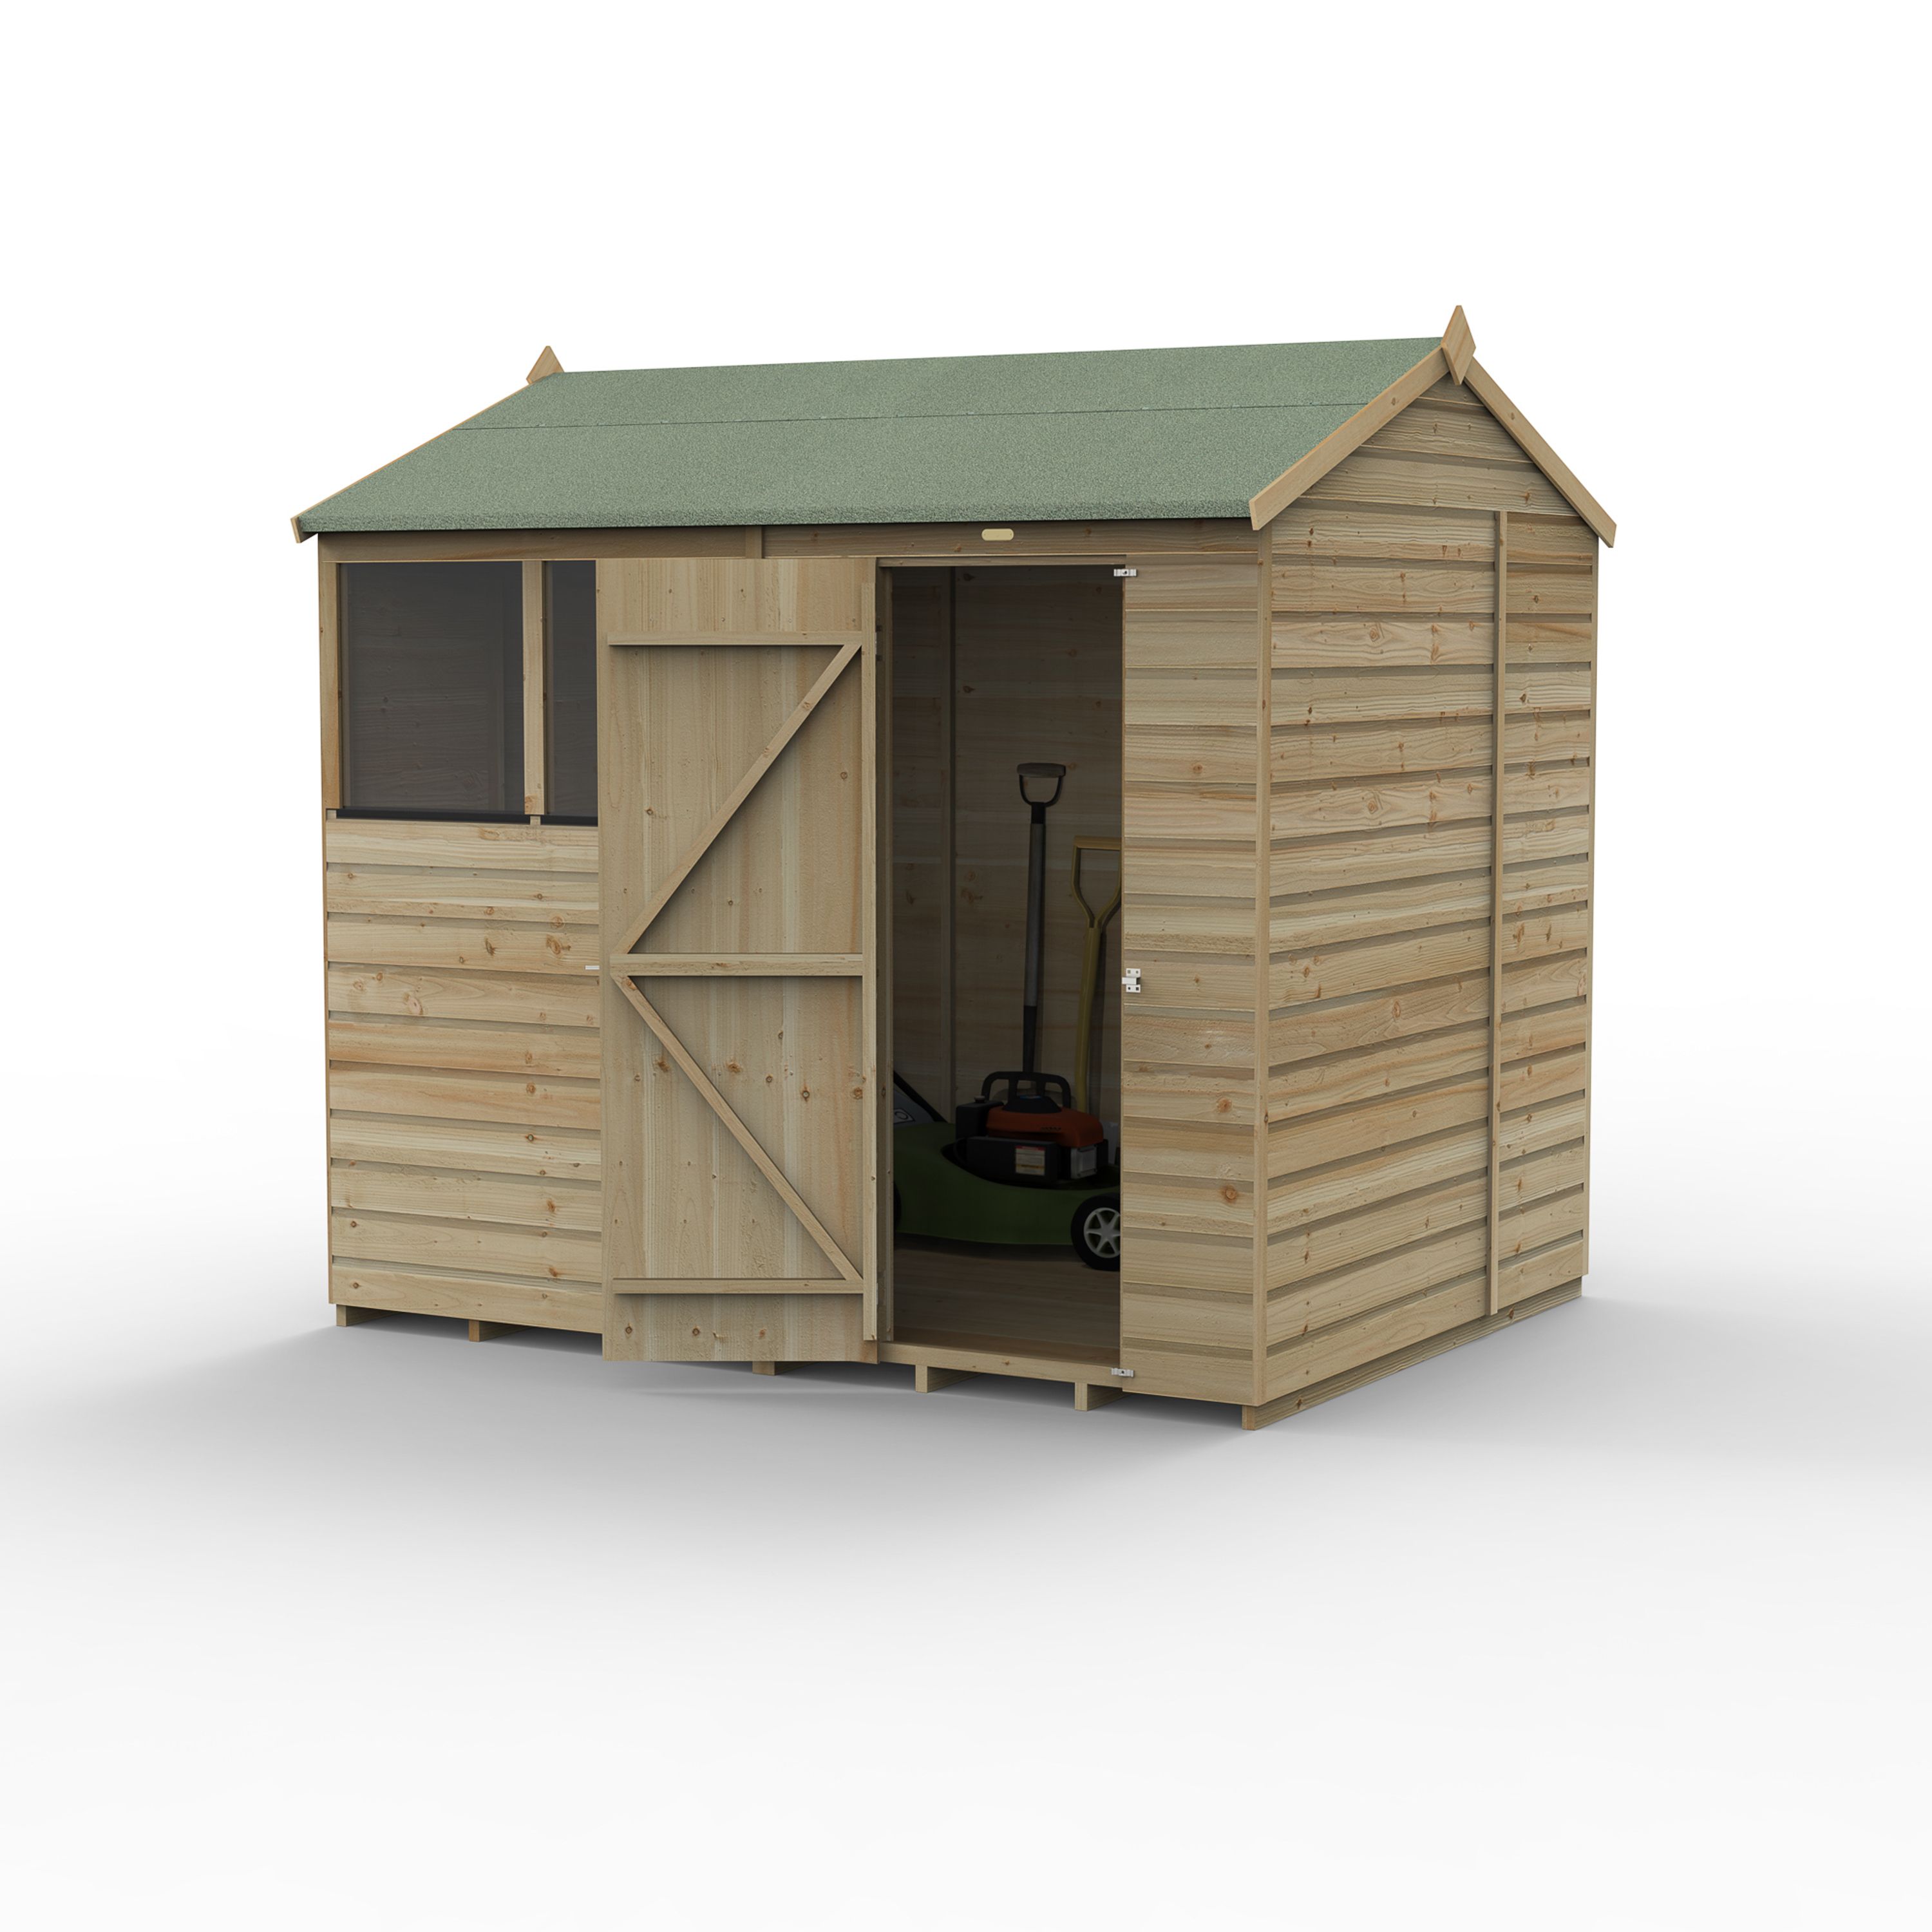 Forest Garden Beckwood 8x6 ft Reverse apex Natural timber Wooden Shed with floor & 2 windows - Assembly not required